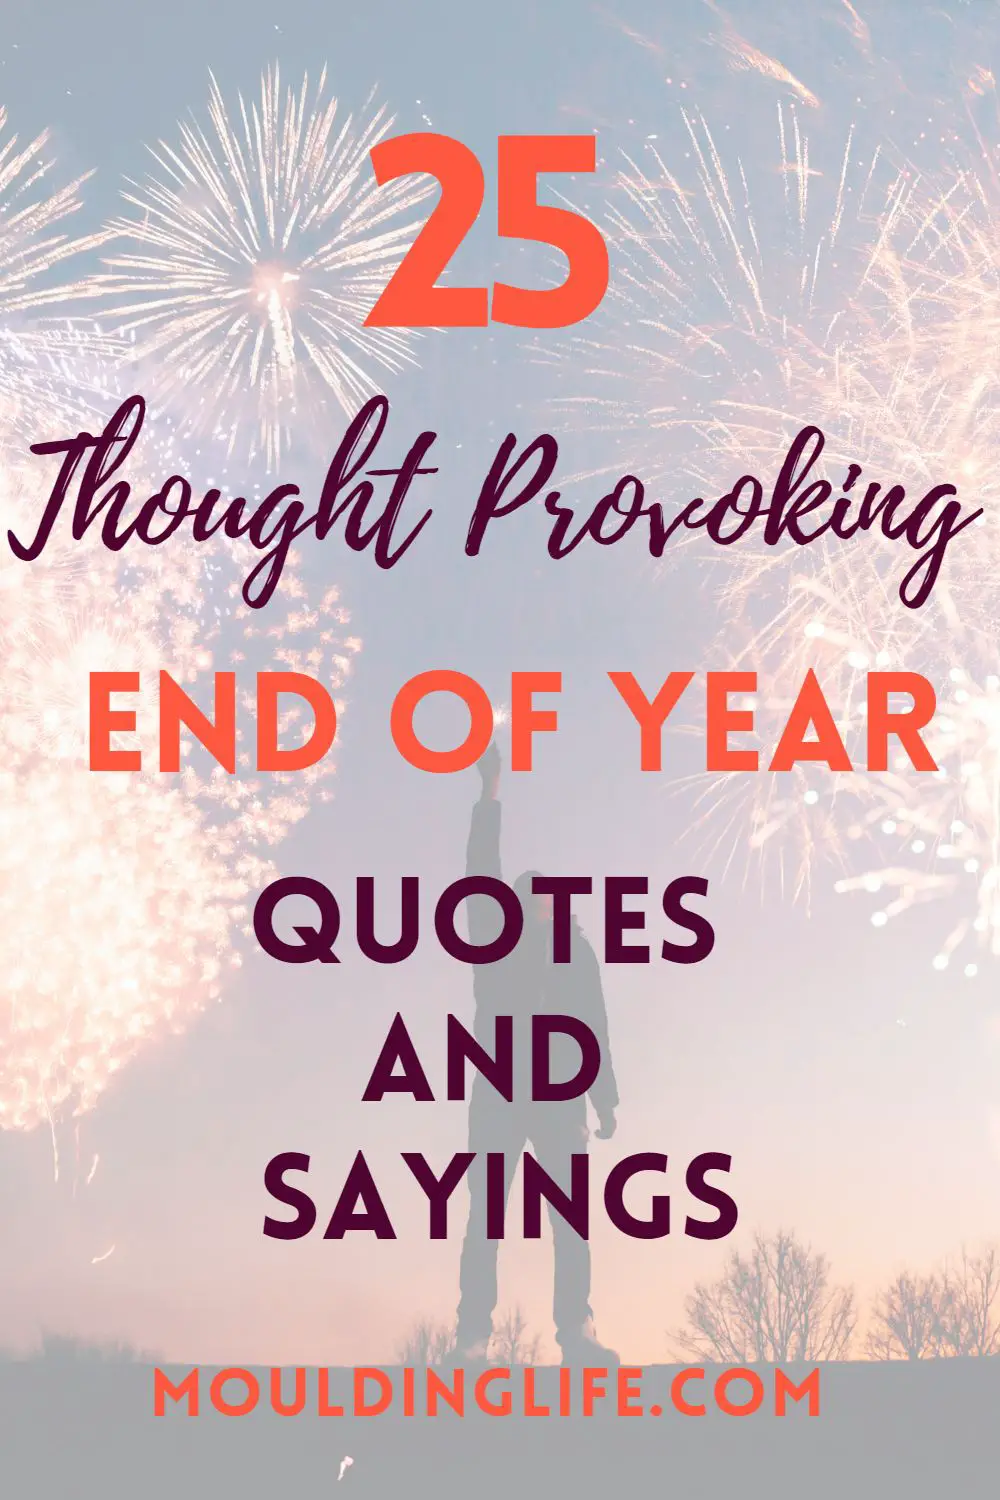 inspirational end of year quotes